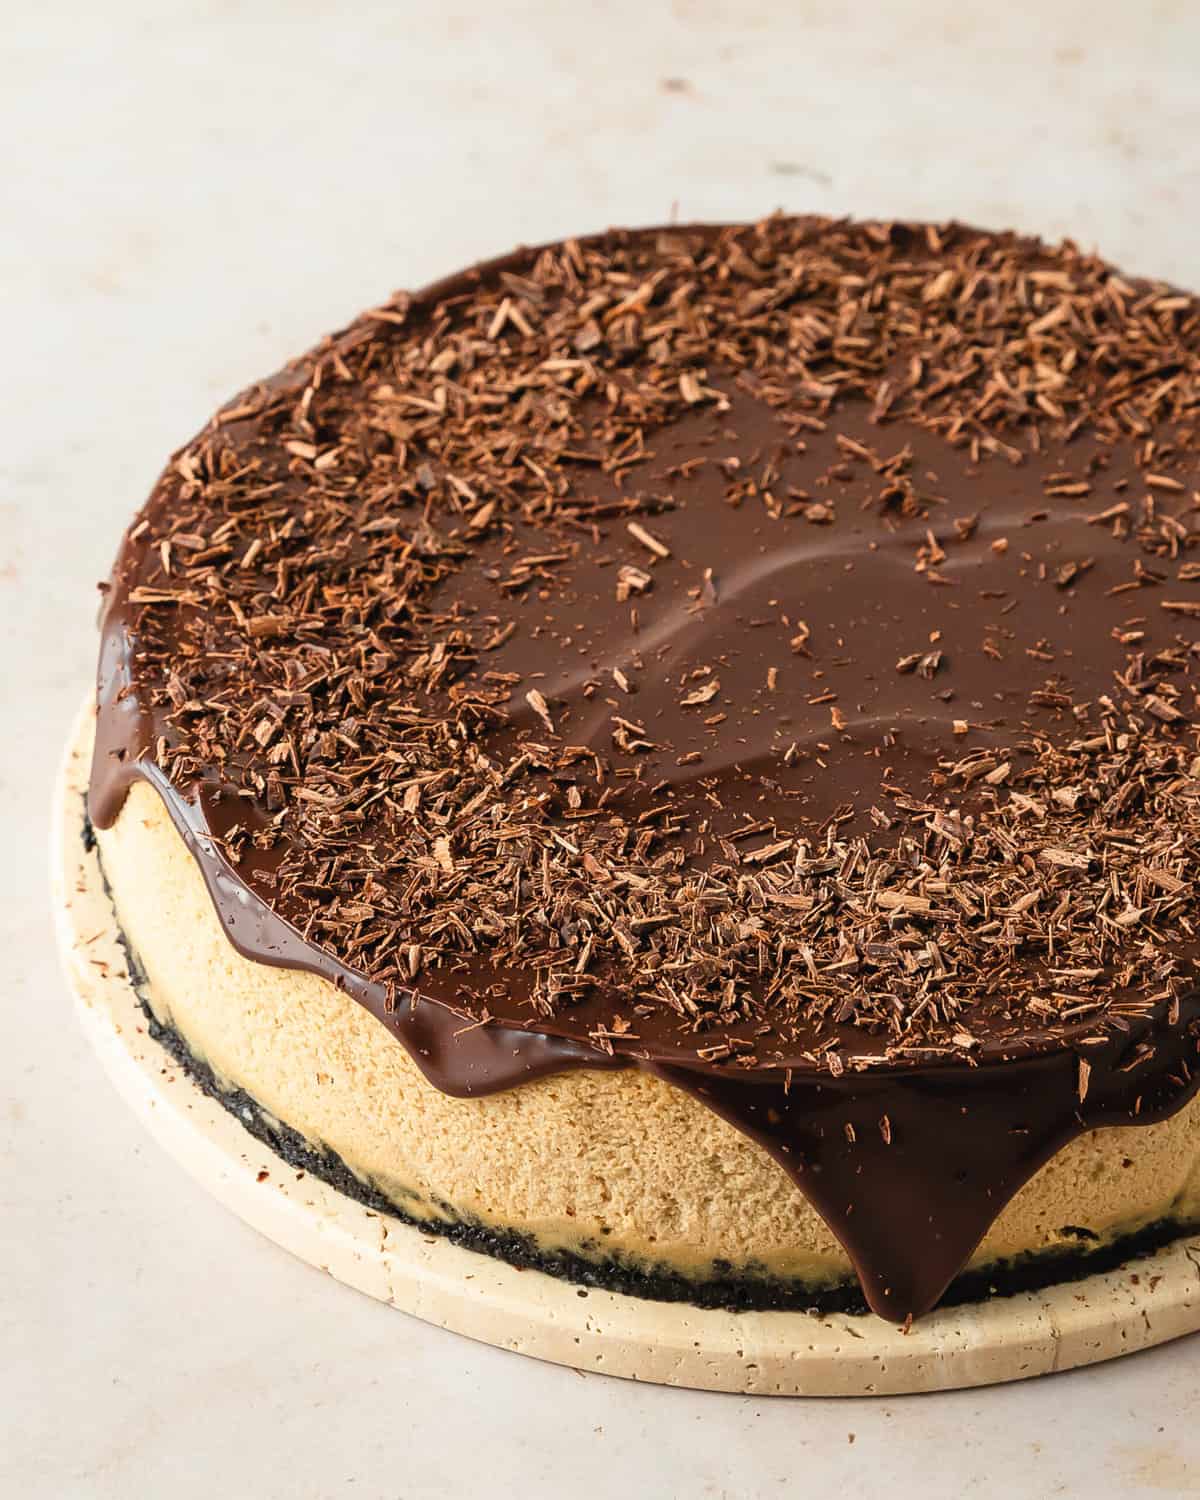 Coffee cheesecake is a smooth and creamy espresso cheesecake with an espresso chocolate cookie crust. For even more decadent coffee flavor, this espresso cheesecake is topped with an easy chocolate coffee ganache. Make this chocolate espresso cheesecake the next time you need a deliciously decadent dessert that’s perfect for the coffee and cheesecake lover in your life.